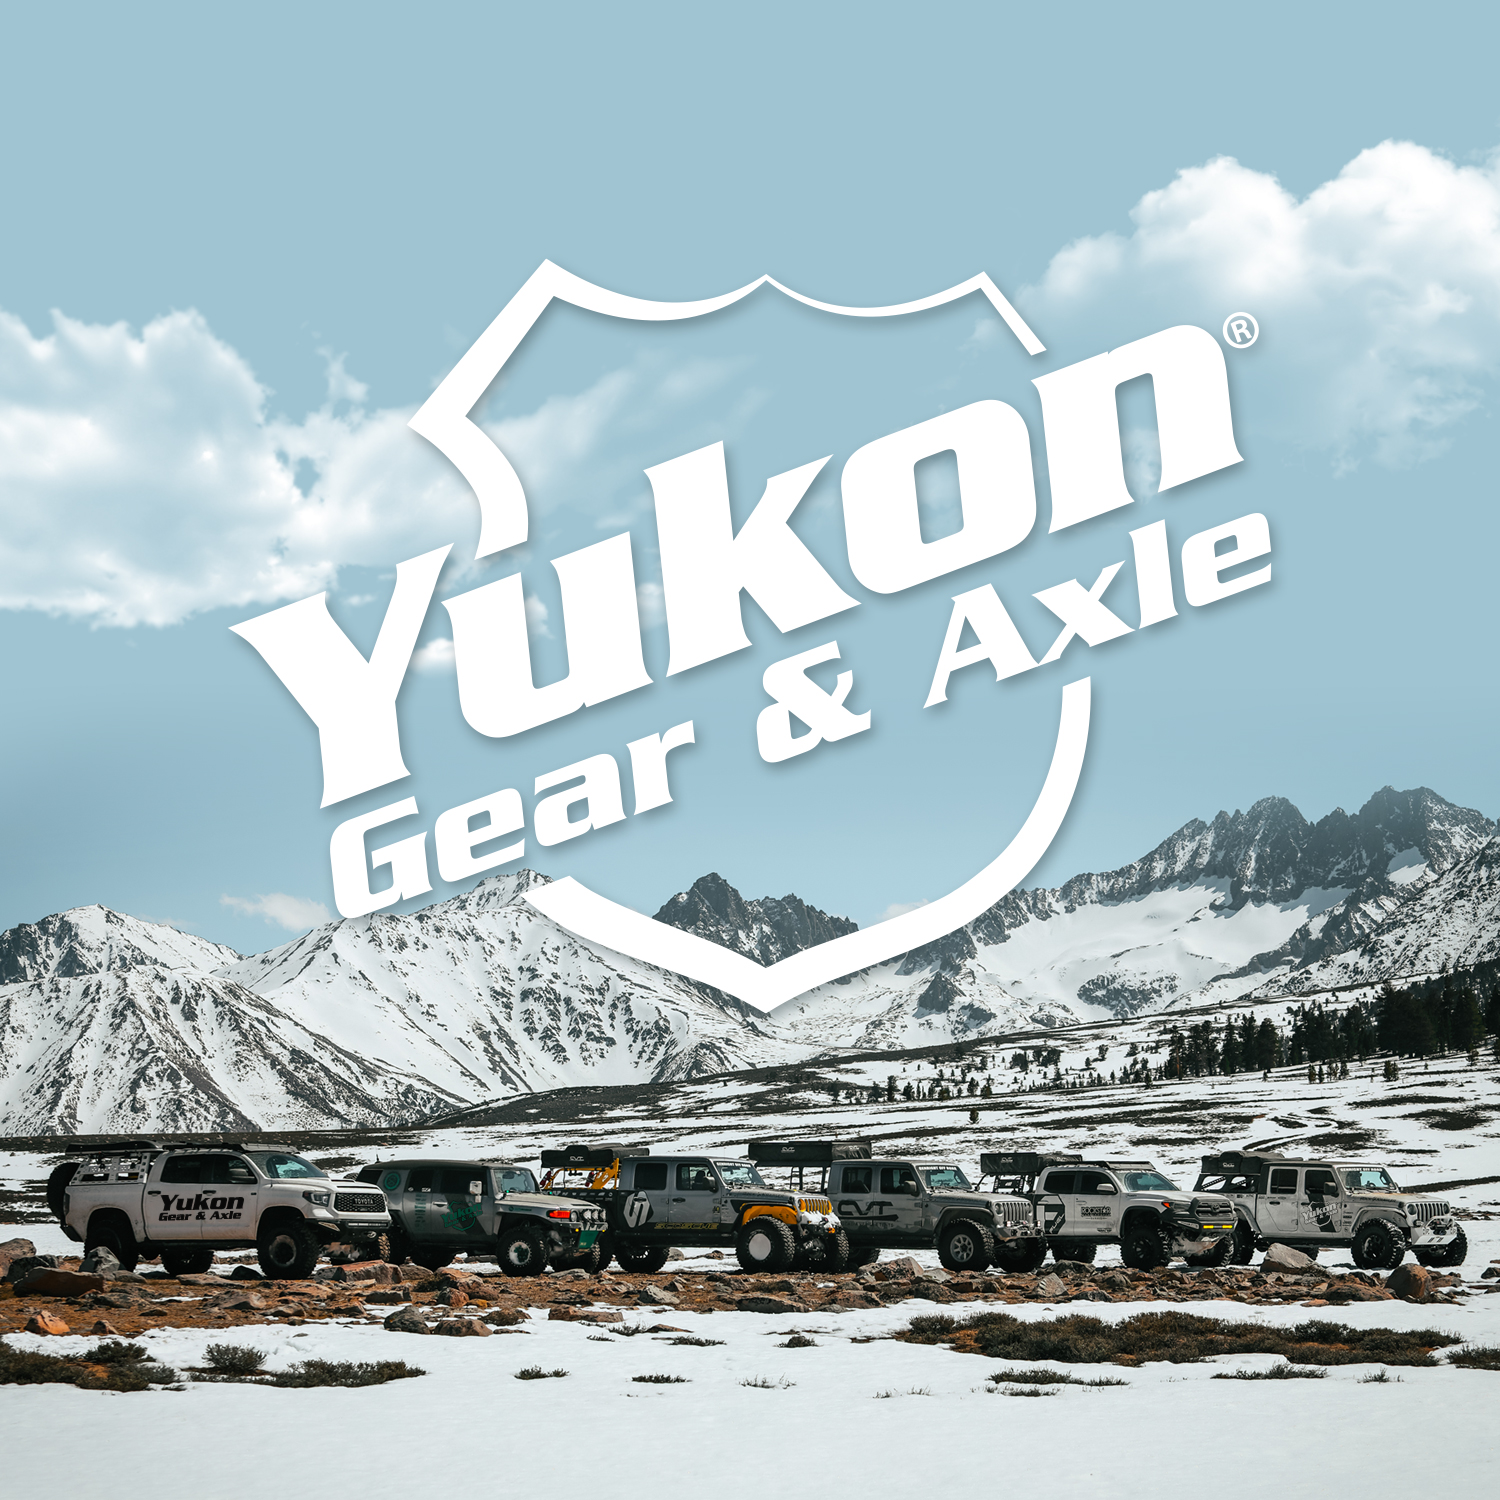 Yukon Pinion install kit for Ford 9" differential 